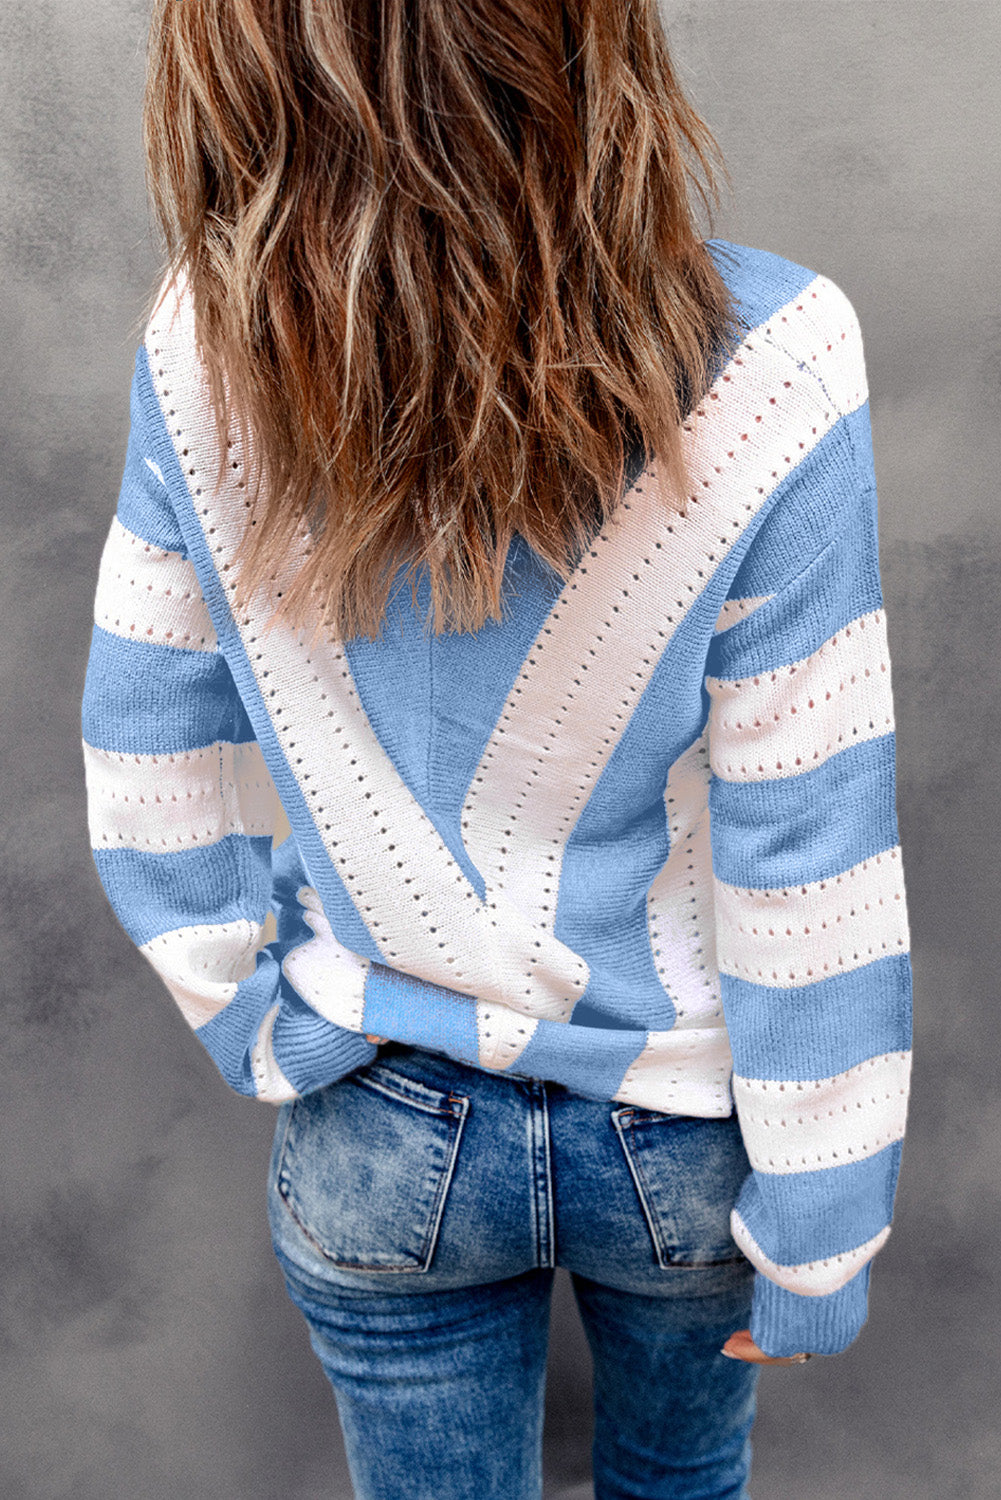 Gray Striped Colorblock V Neck Knitted Sweater